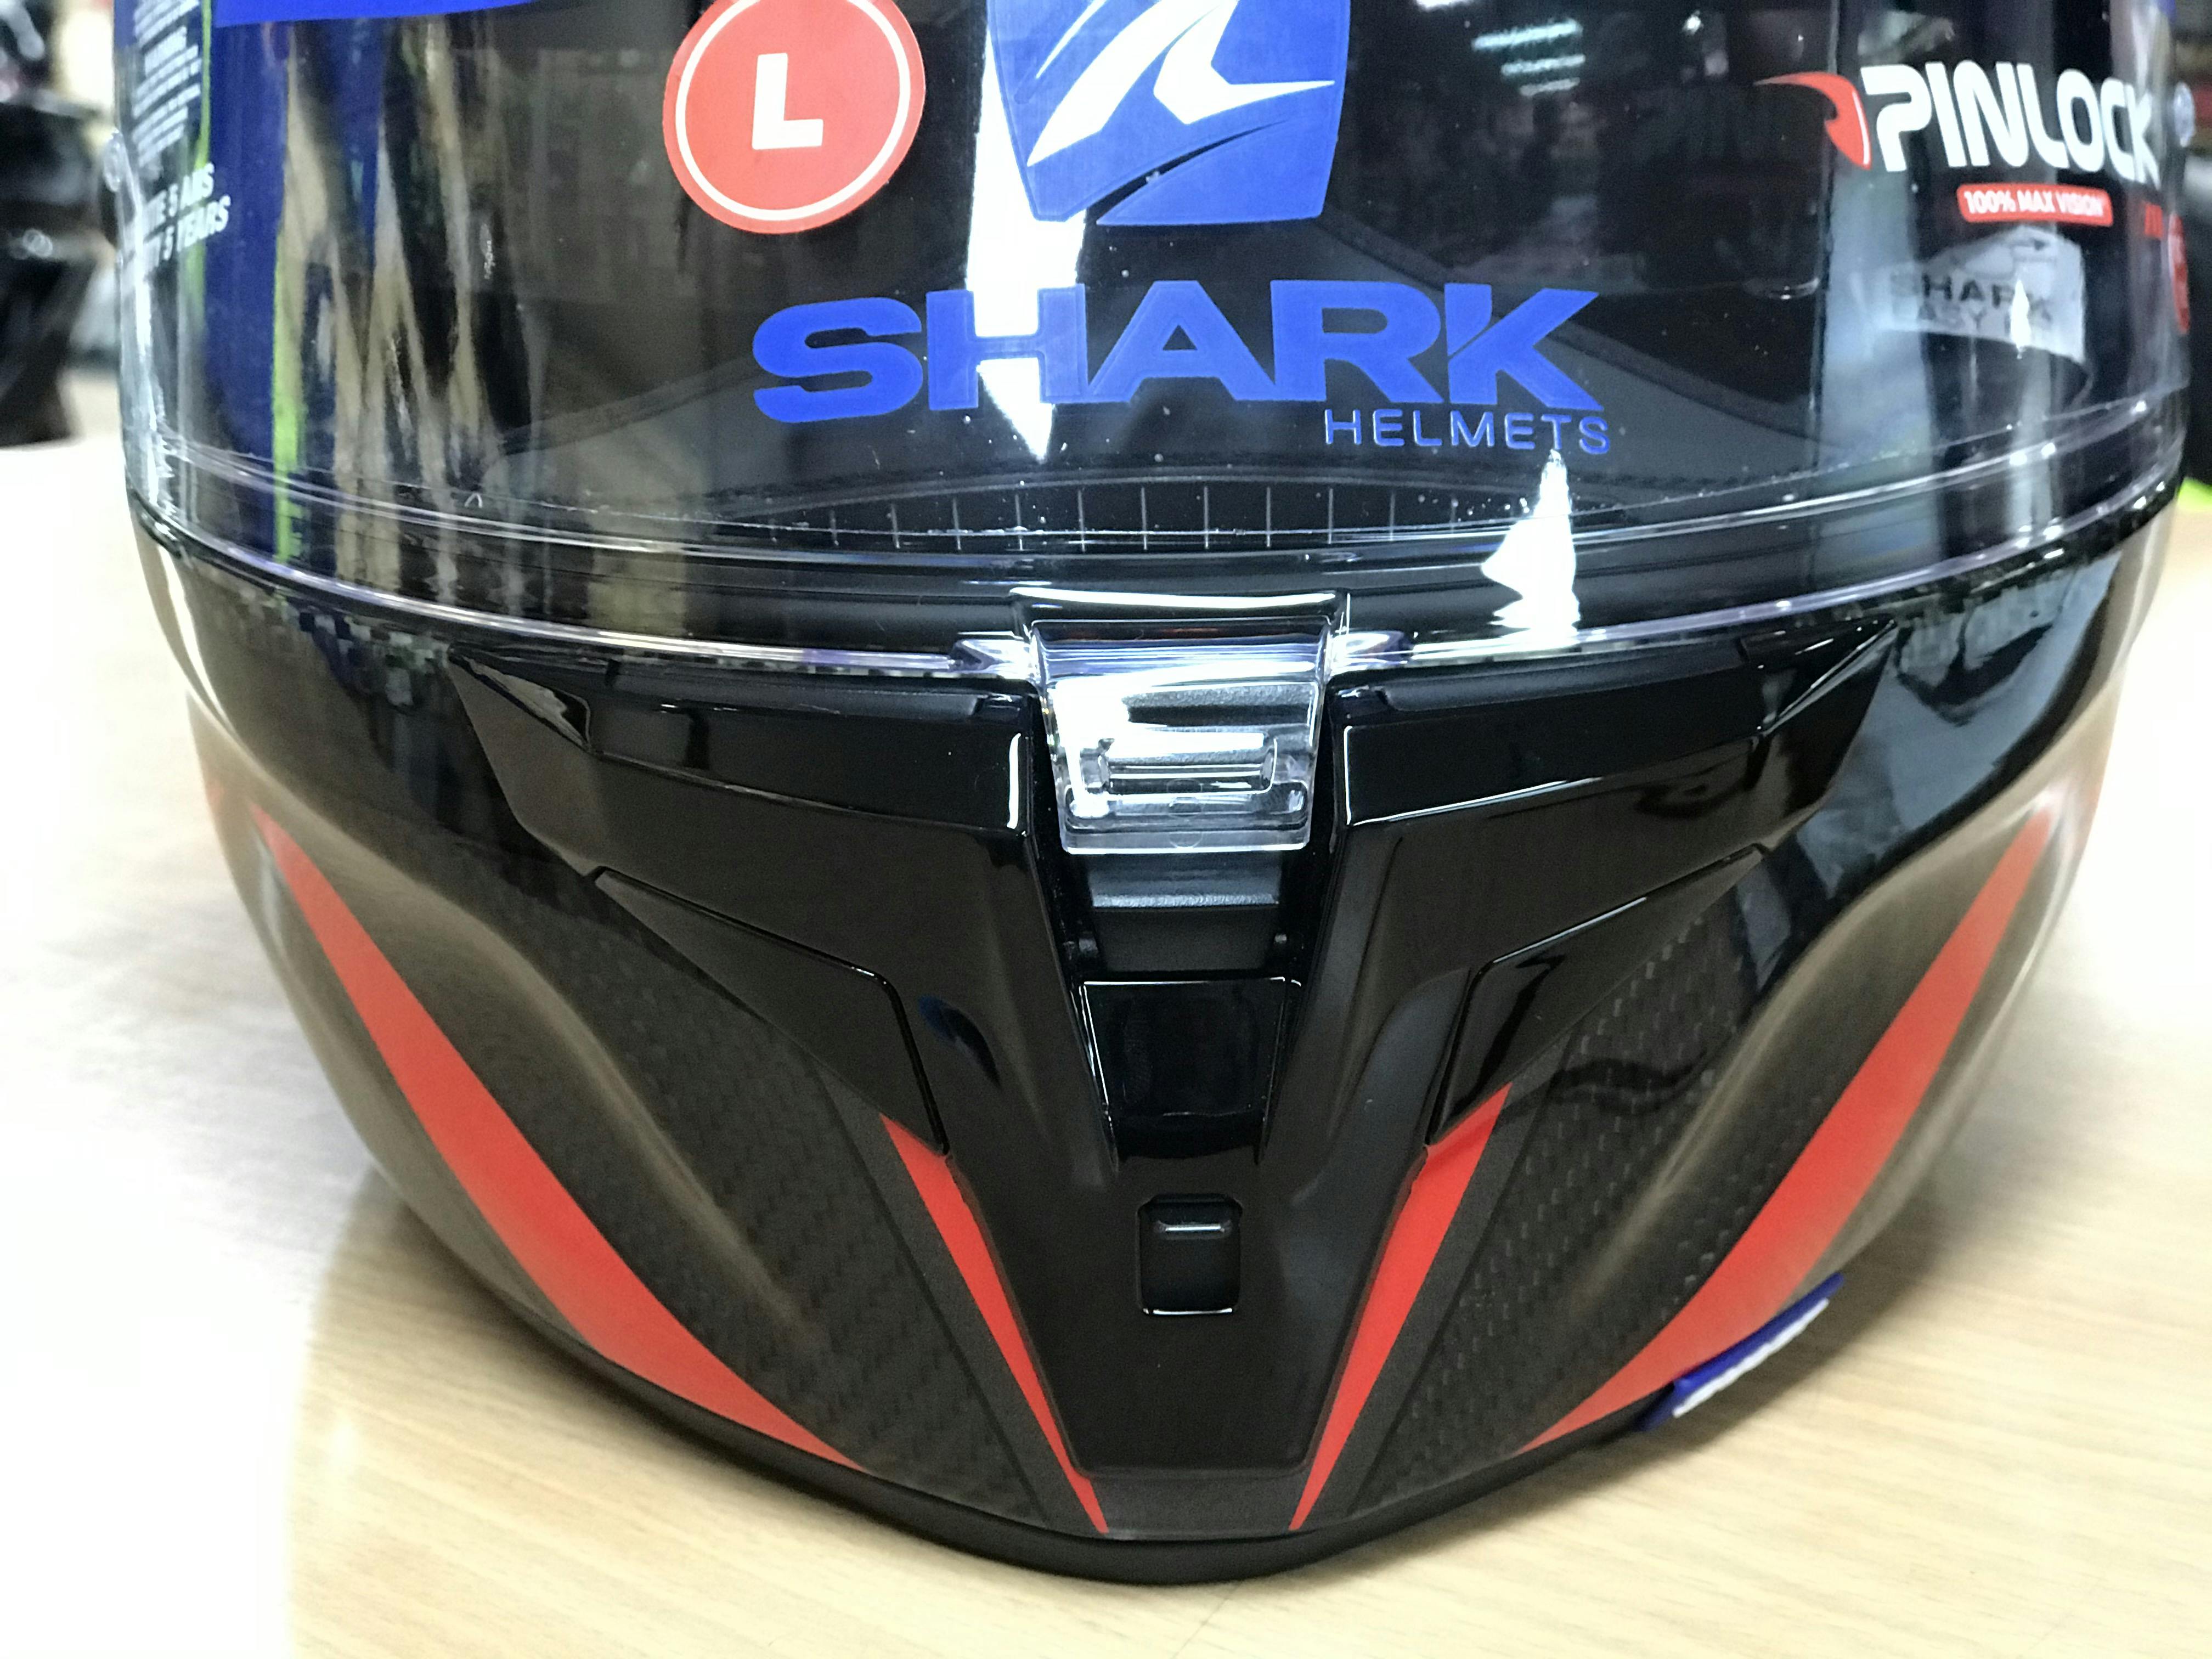 The new front visor lock down system on the Shark Carbon Spartan GT